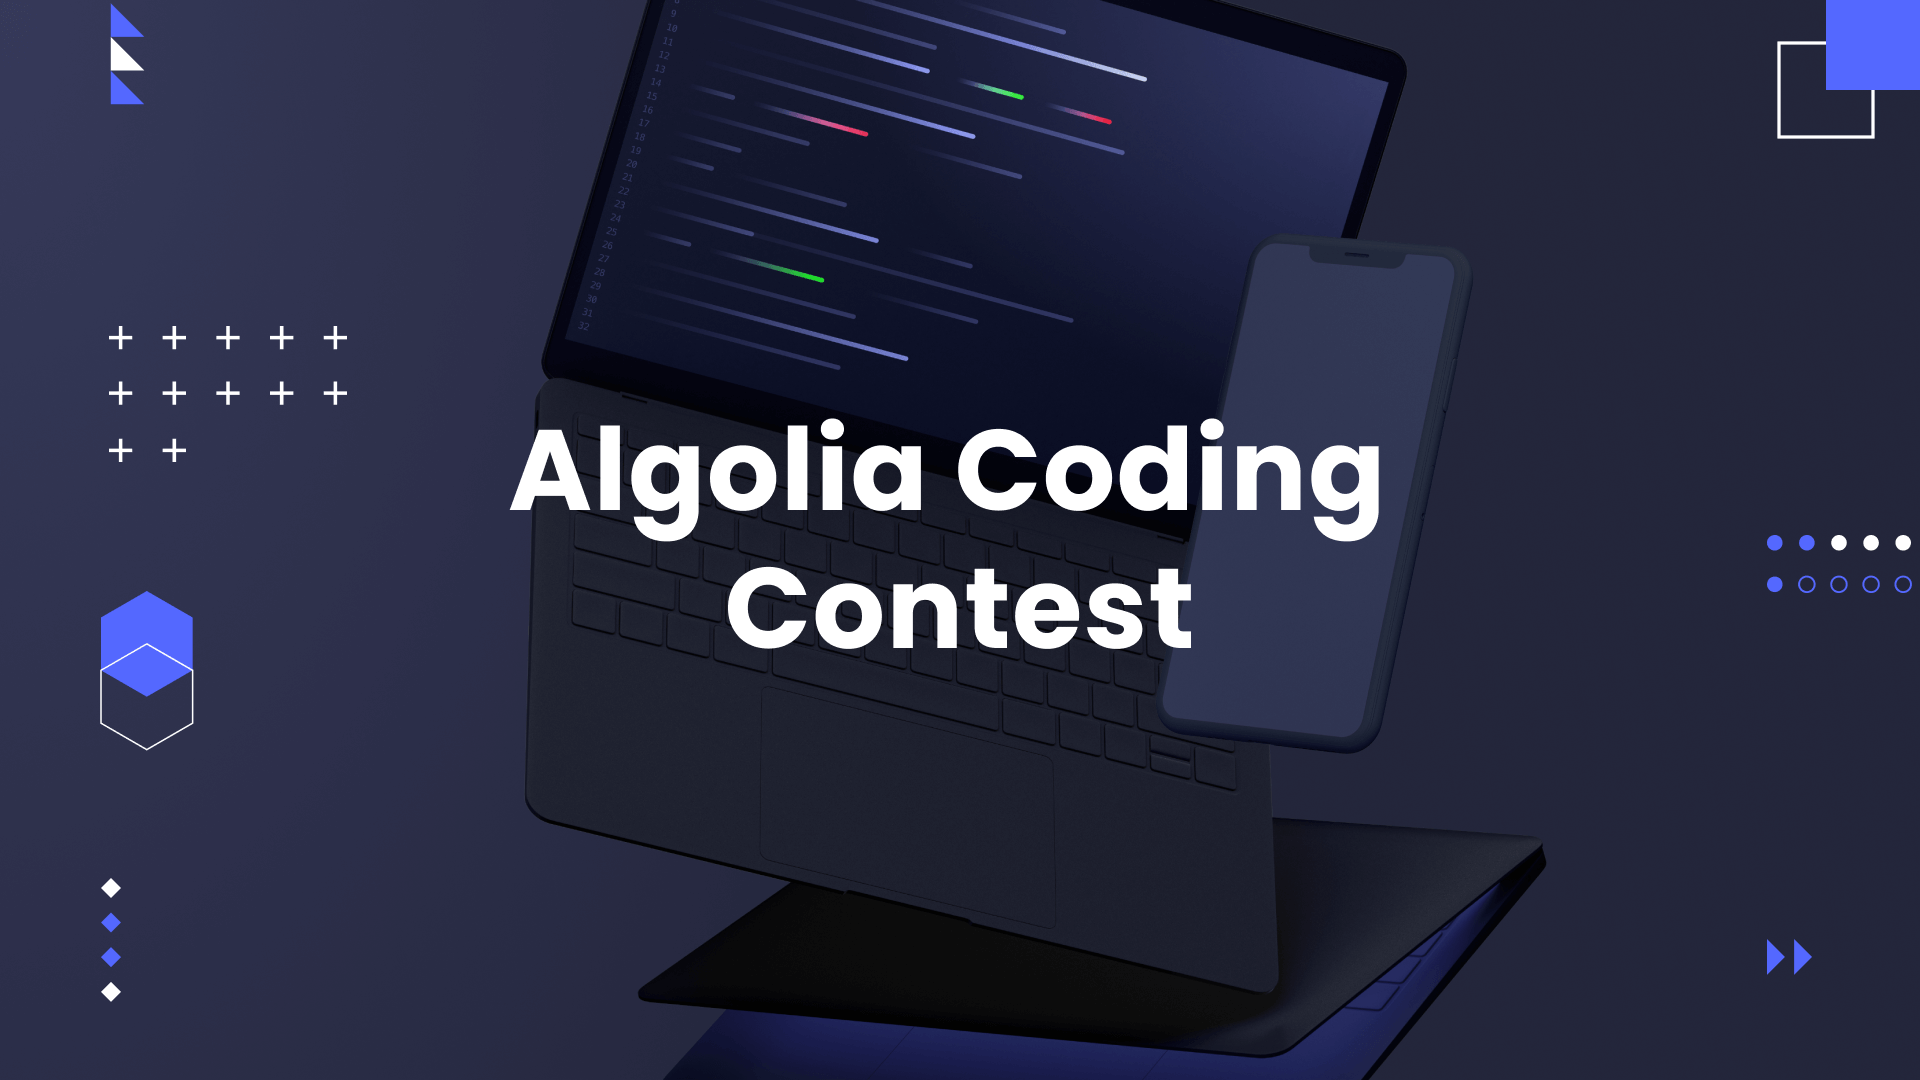 Enter our Coding Contest: submit a project showcasing Algolia and win a smartphone